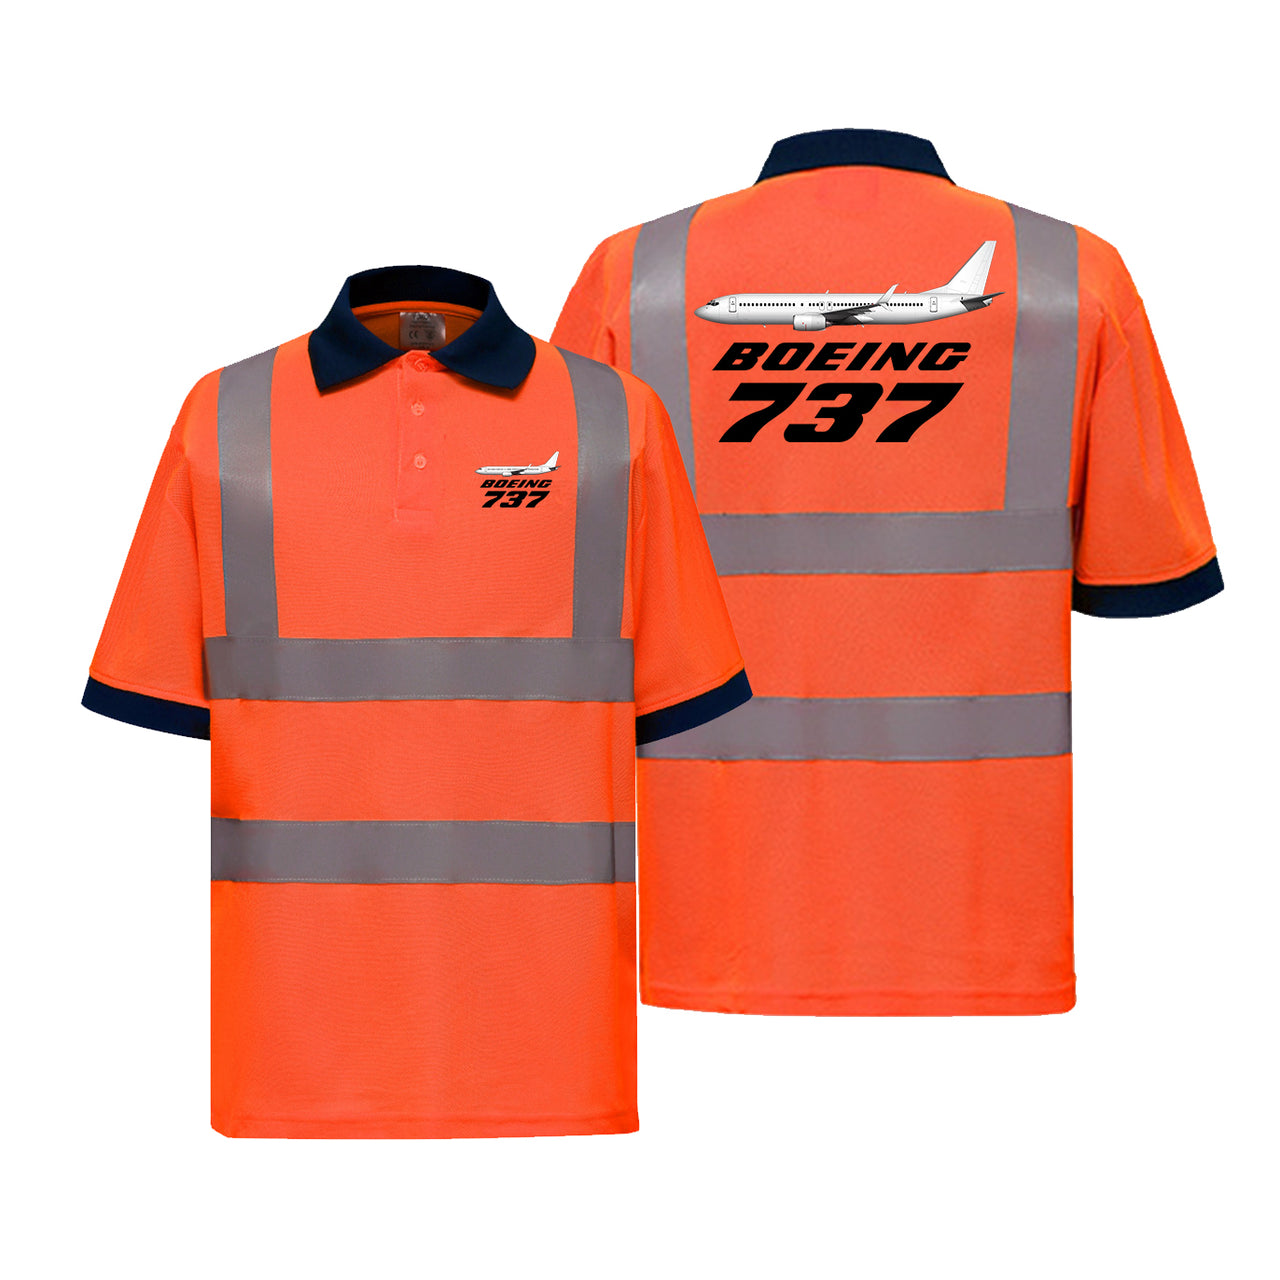 The Boeing 737 Designed Reflective Polo T-Shirts